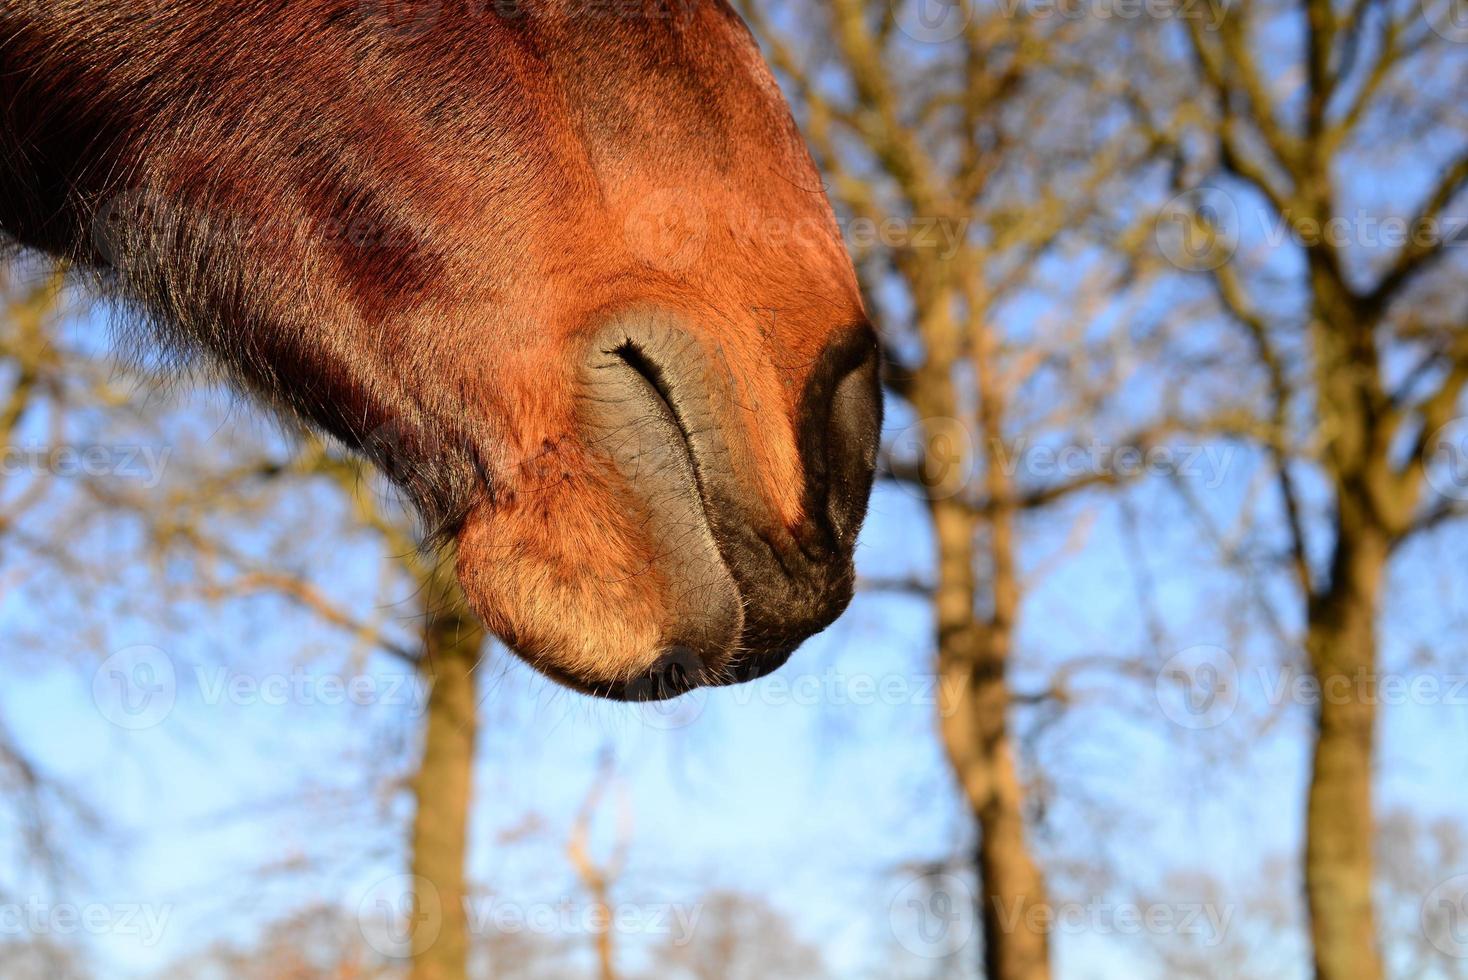 The mouth of a brown horse as a close up photo